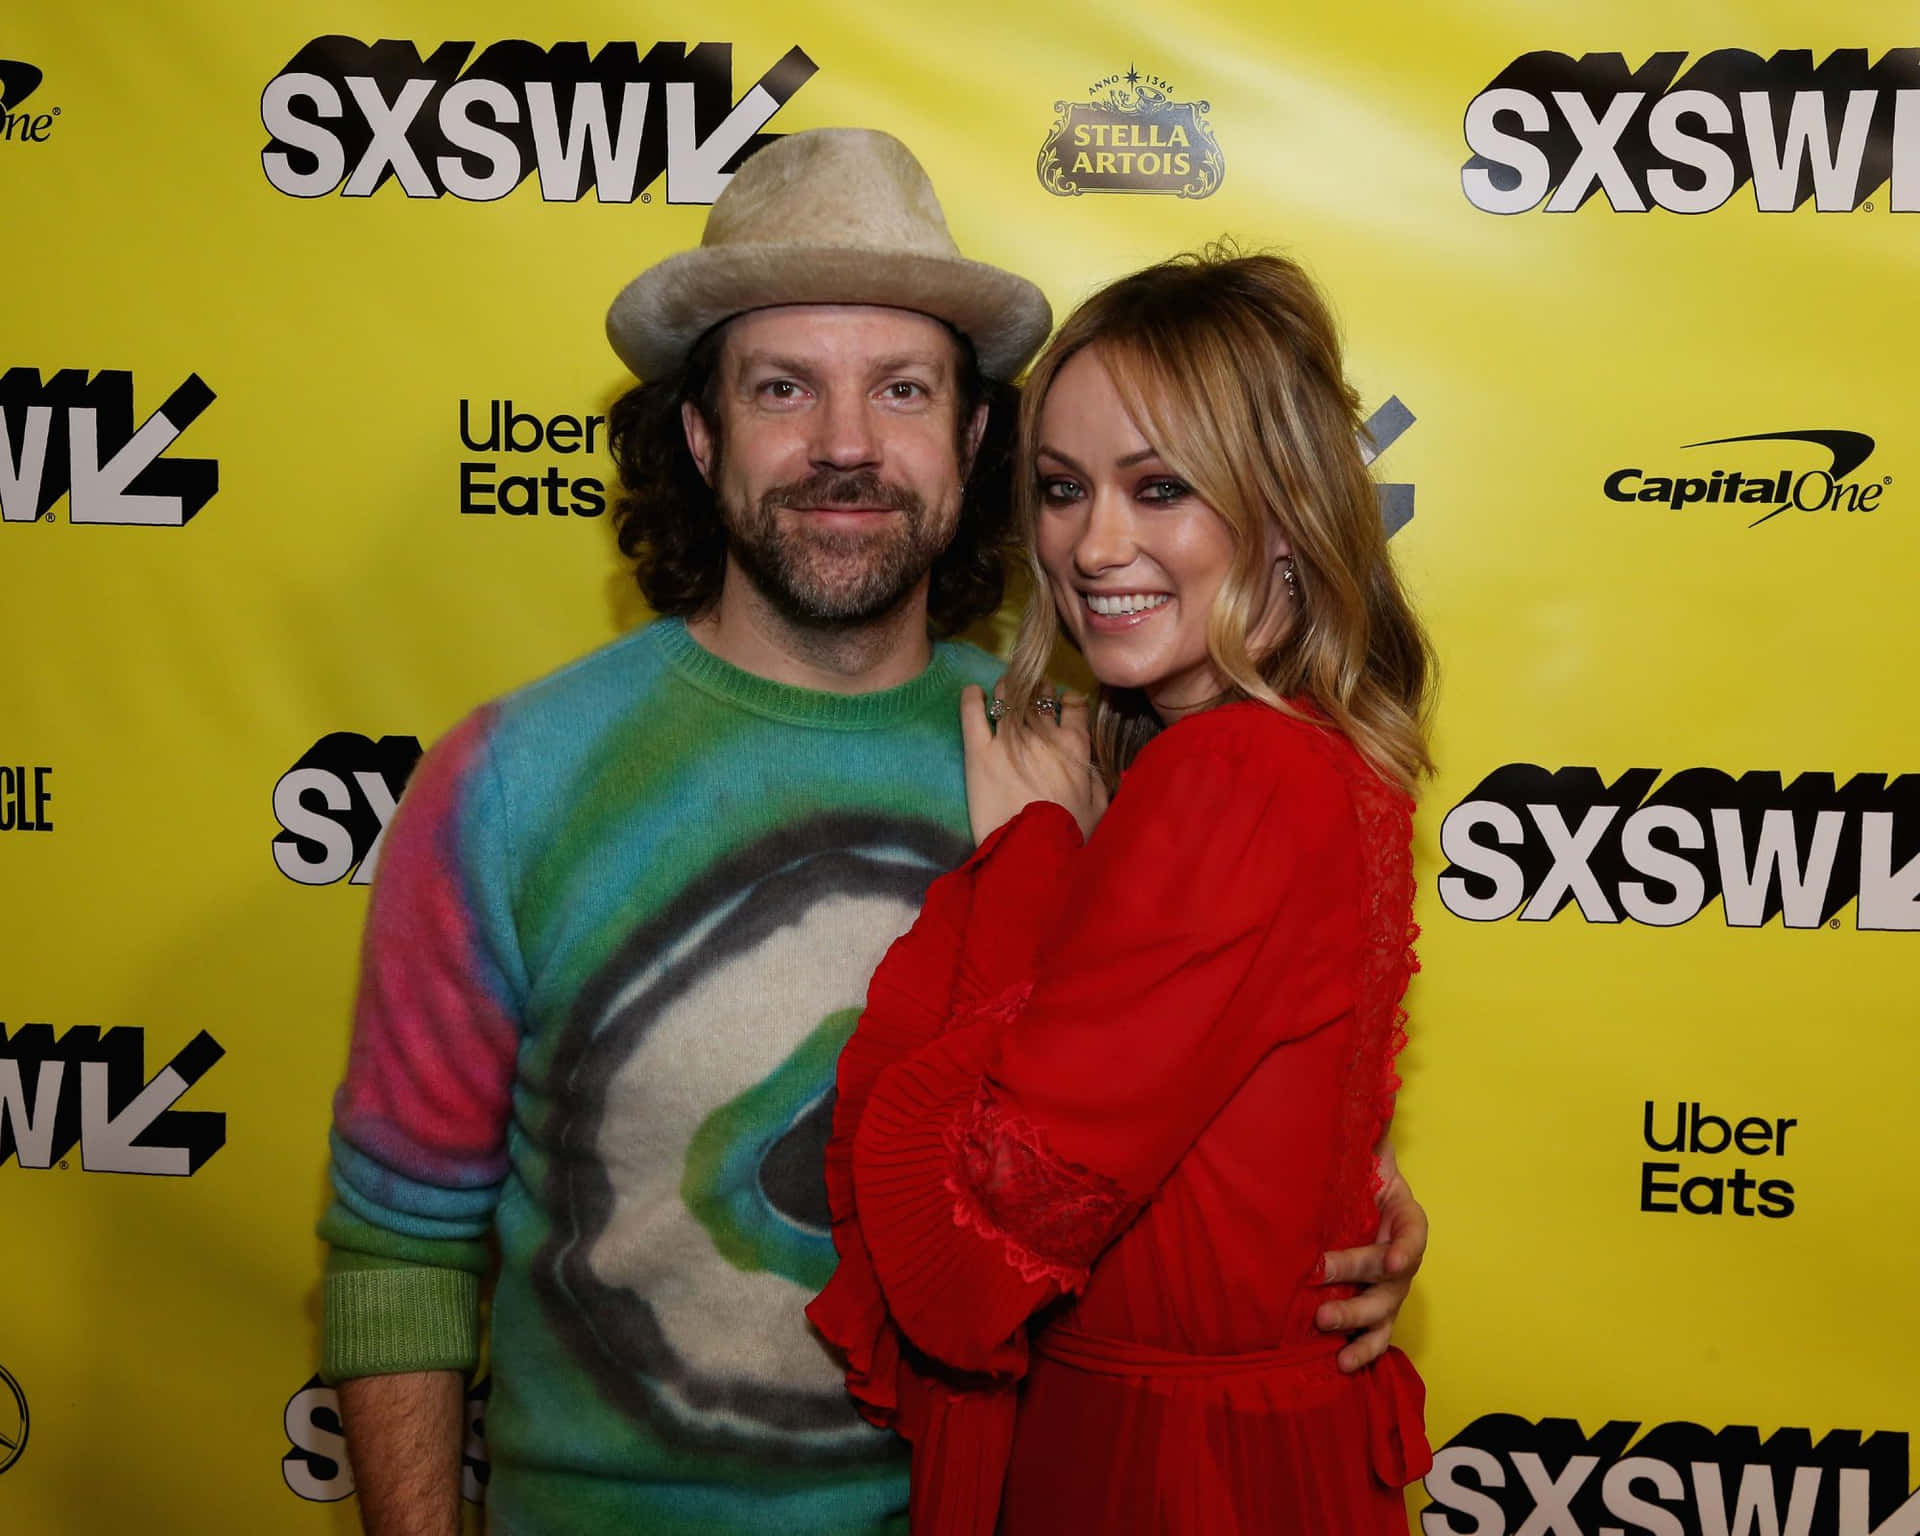 Jasonsudeikis Is A Talented Actor With A Great Sense Of Humor. Fondo de pantalla